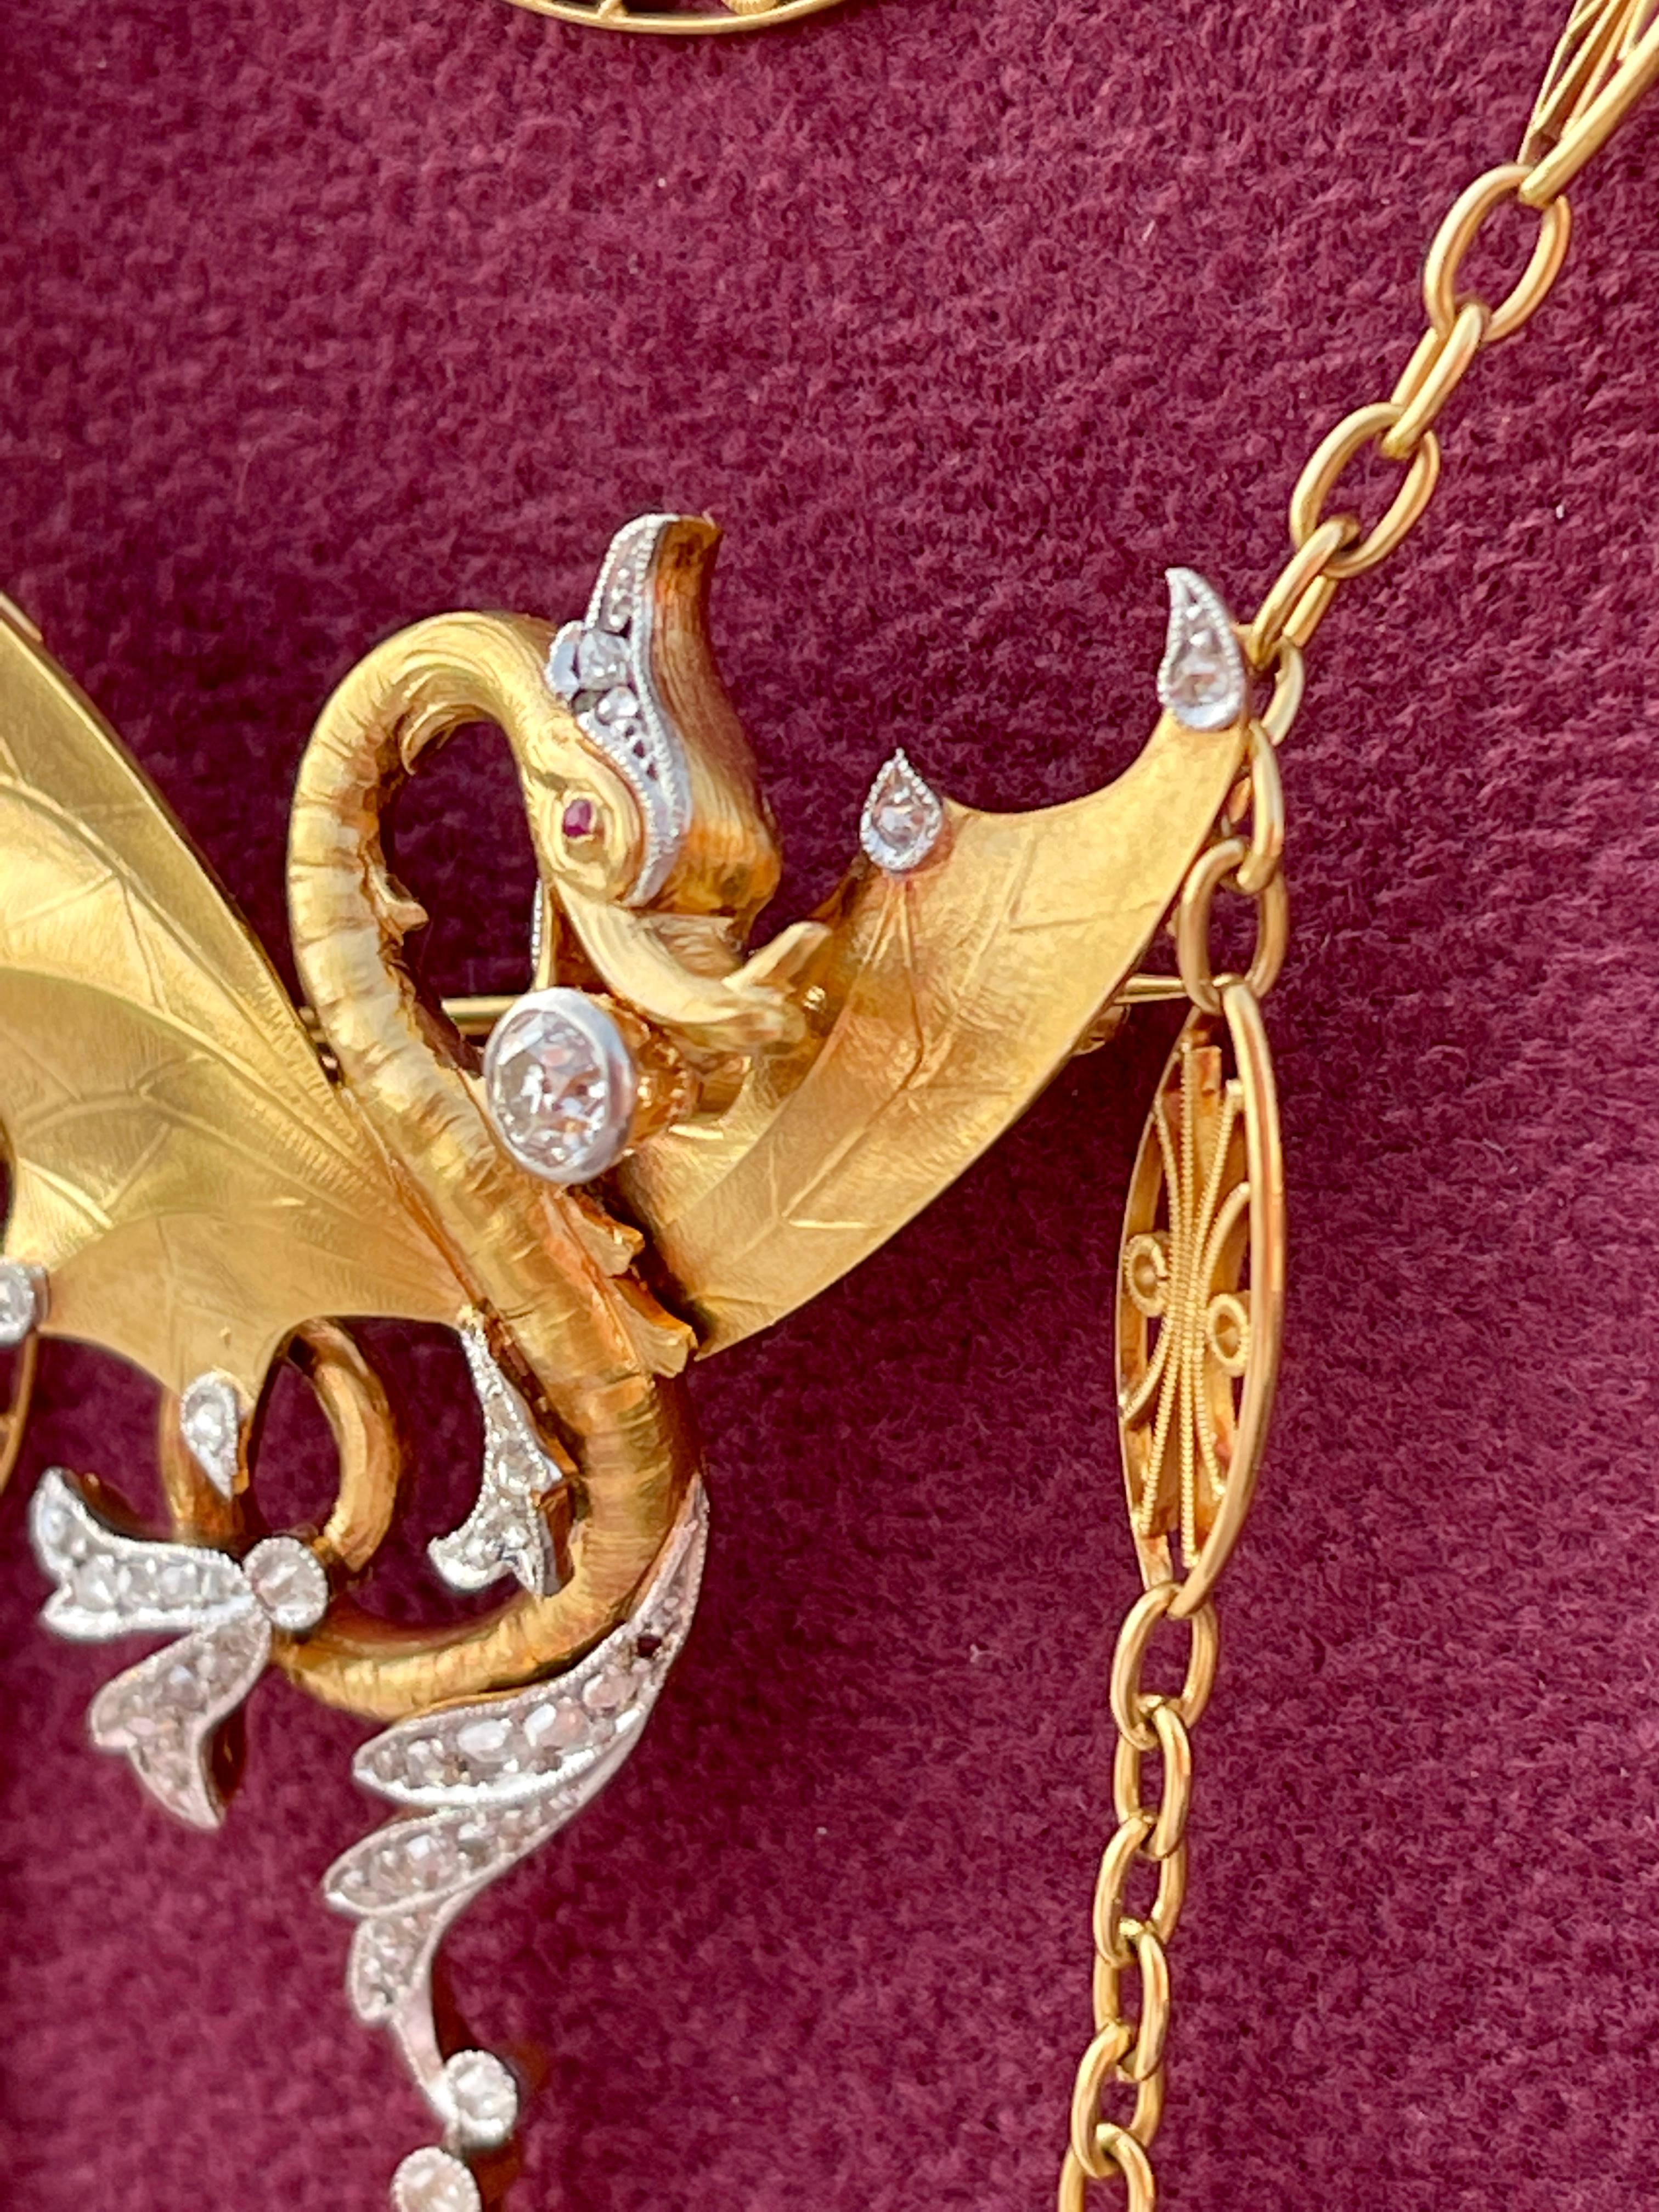  Animal Dragon Diamonds Gold 1890s Chinese Imperial Pendant or Brooch For Sale 1